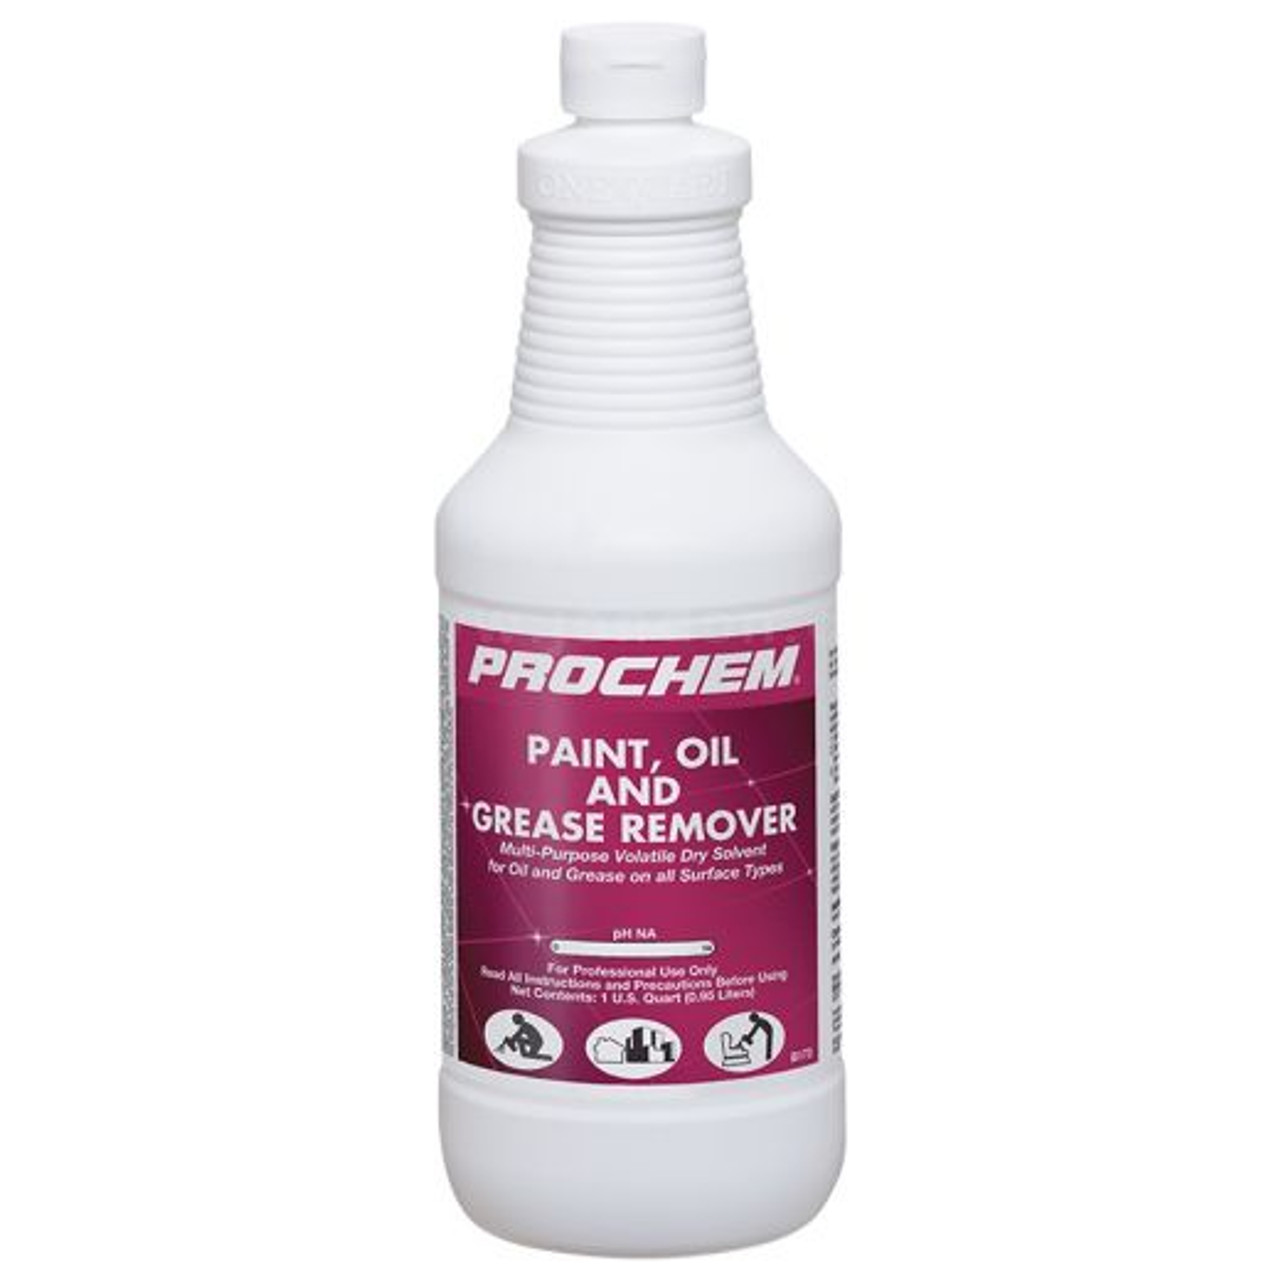 Prochem Paint Oil and Grease Remover - 1pt - CASE of 12ea